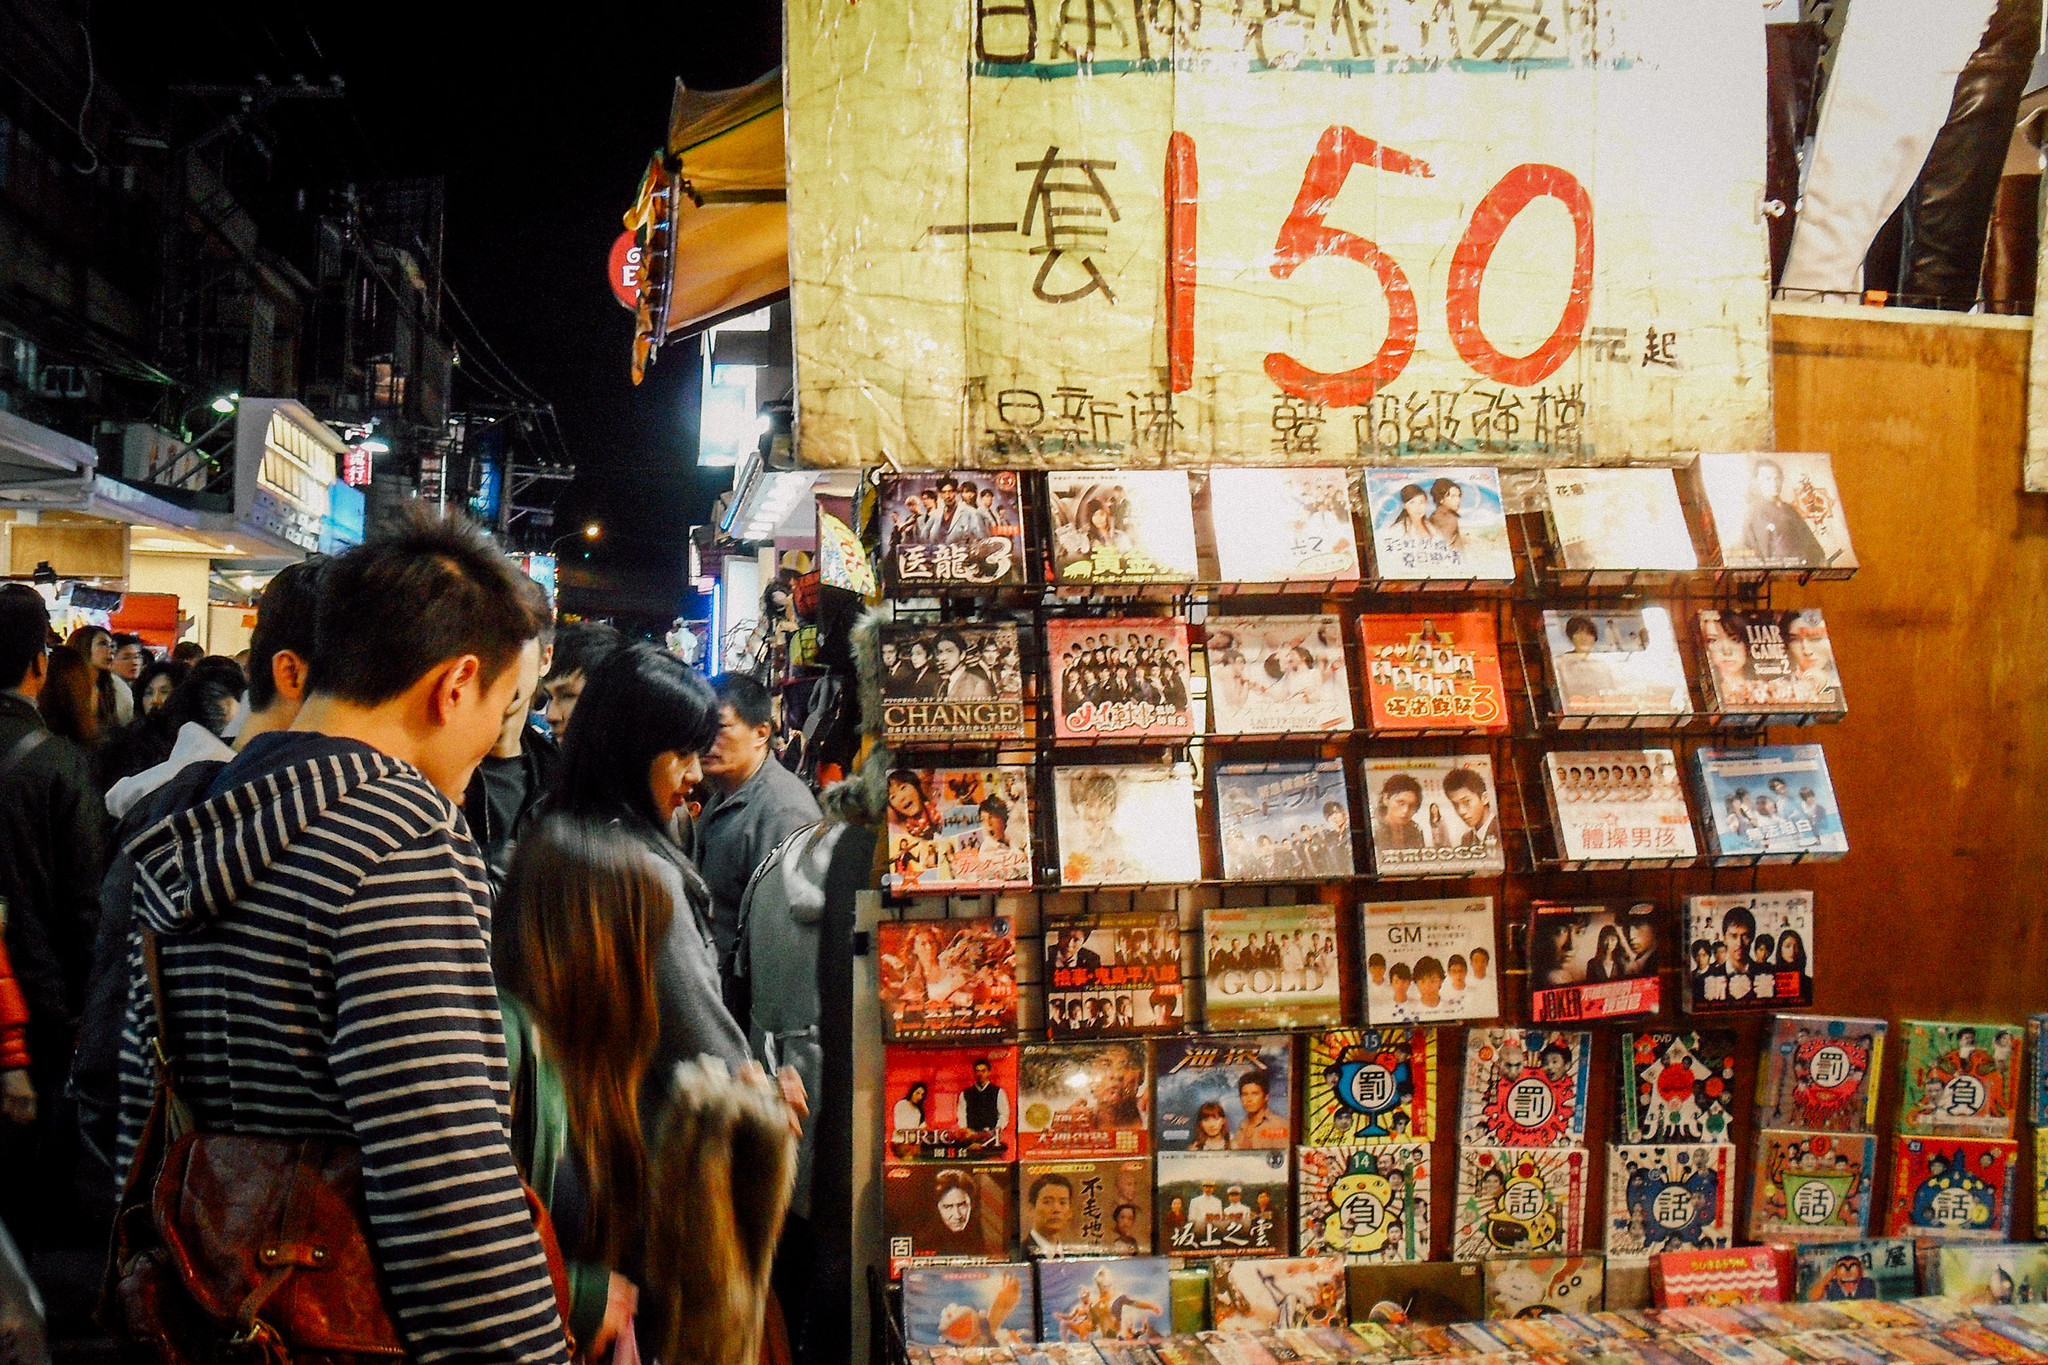 Shilin Nightmarket is one of the most popular in Taipei